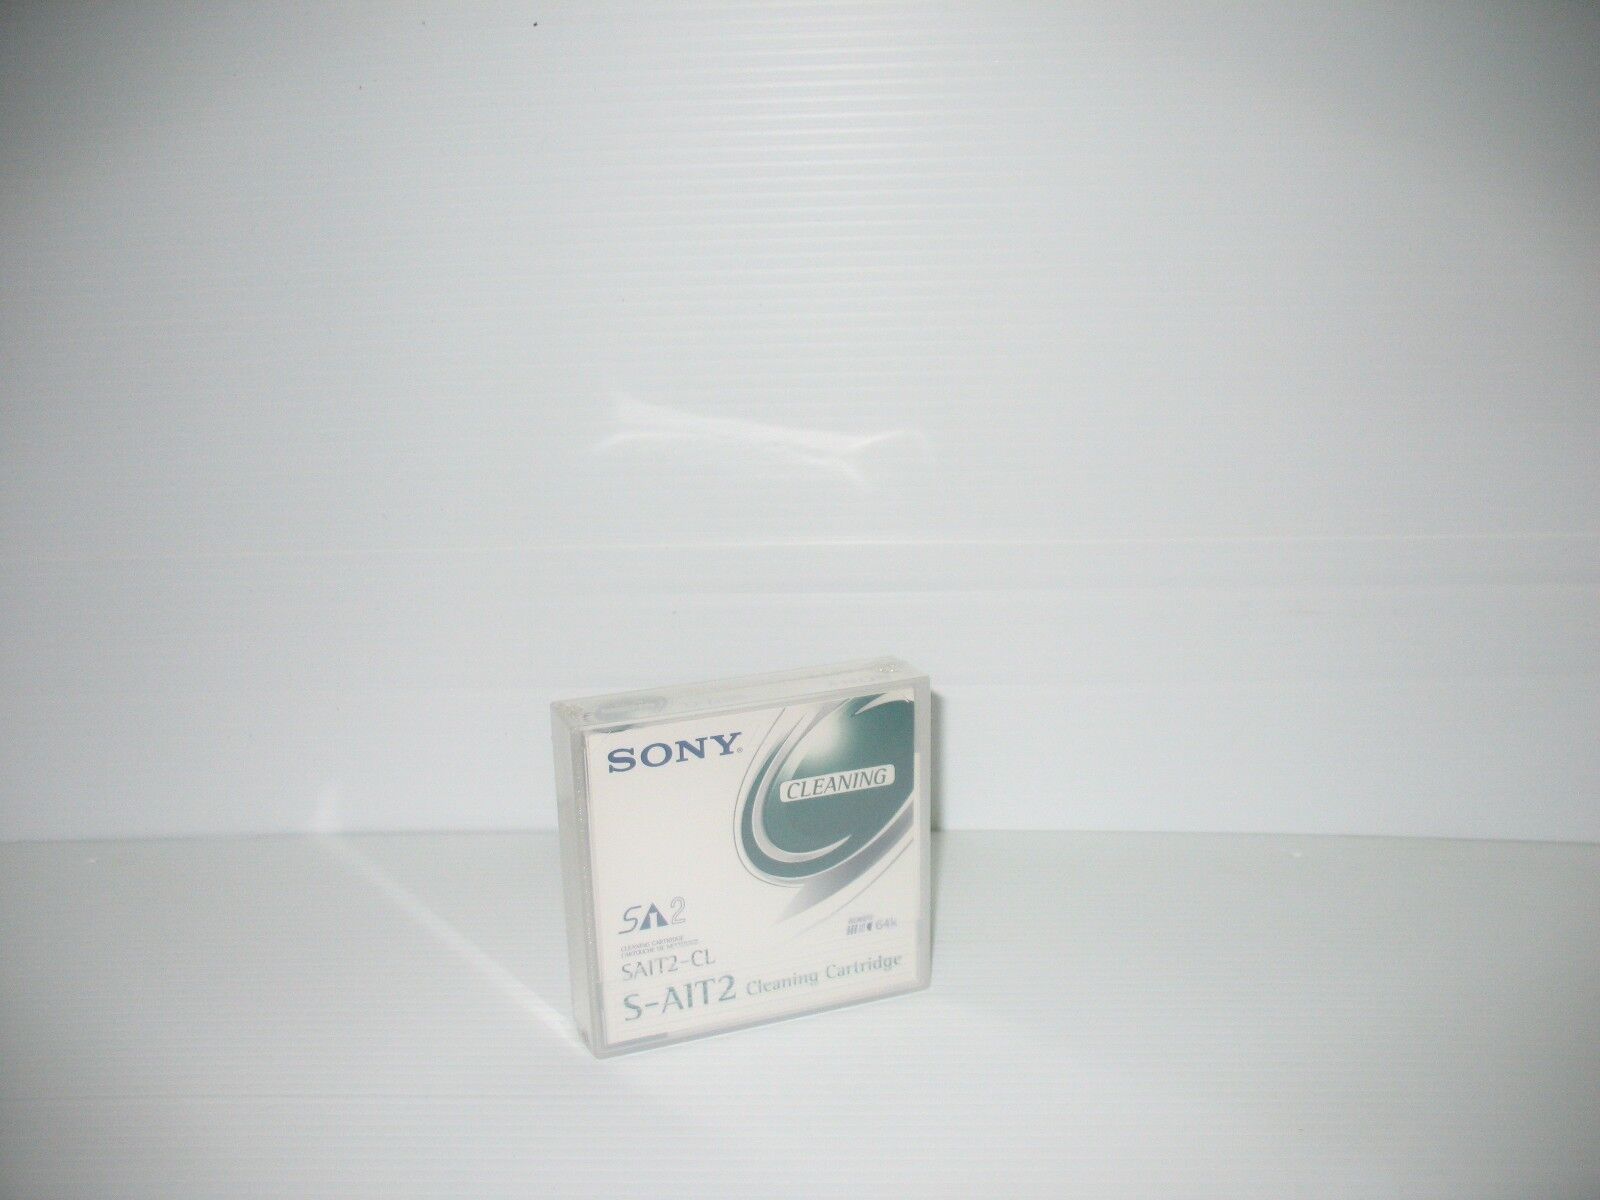 NEW Sealed 1-pack SONY SAIT-2 CLEANING Tape Cartridge SAIT2-CL S-AIT2